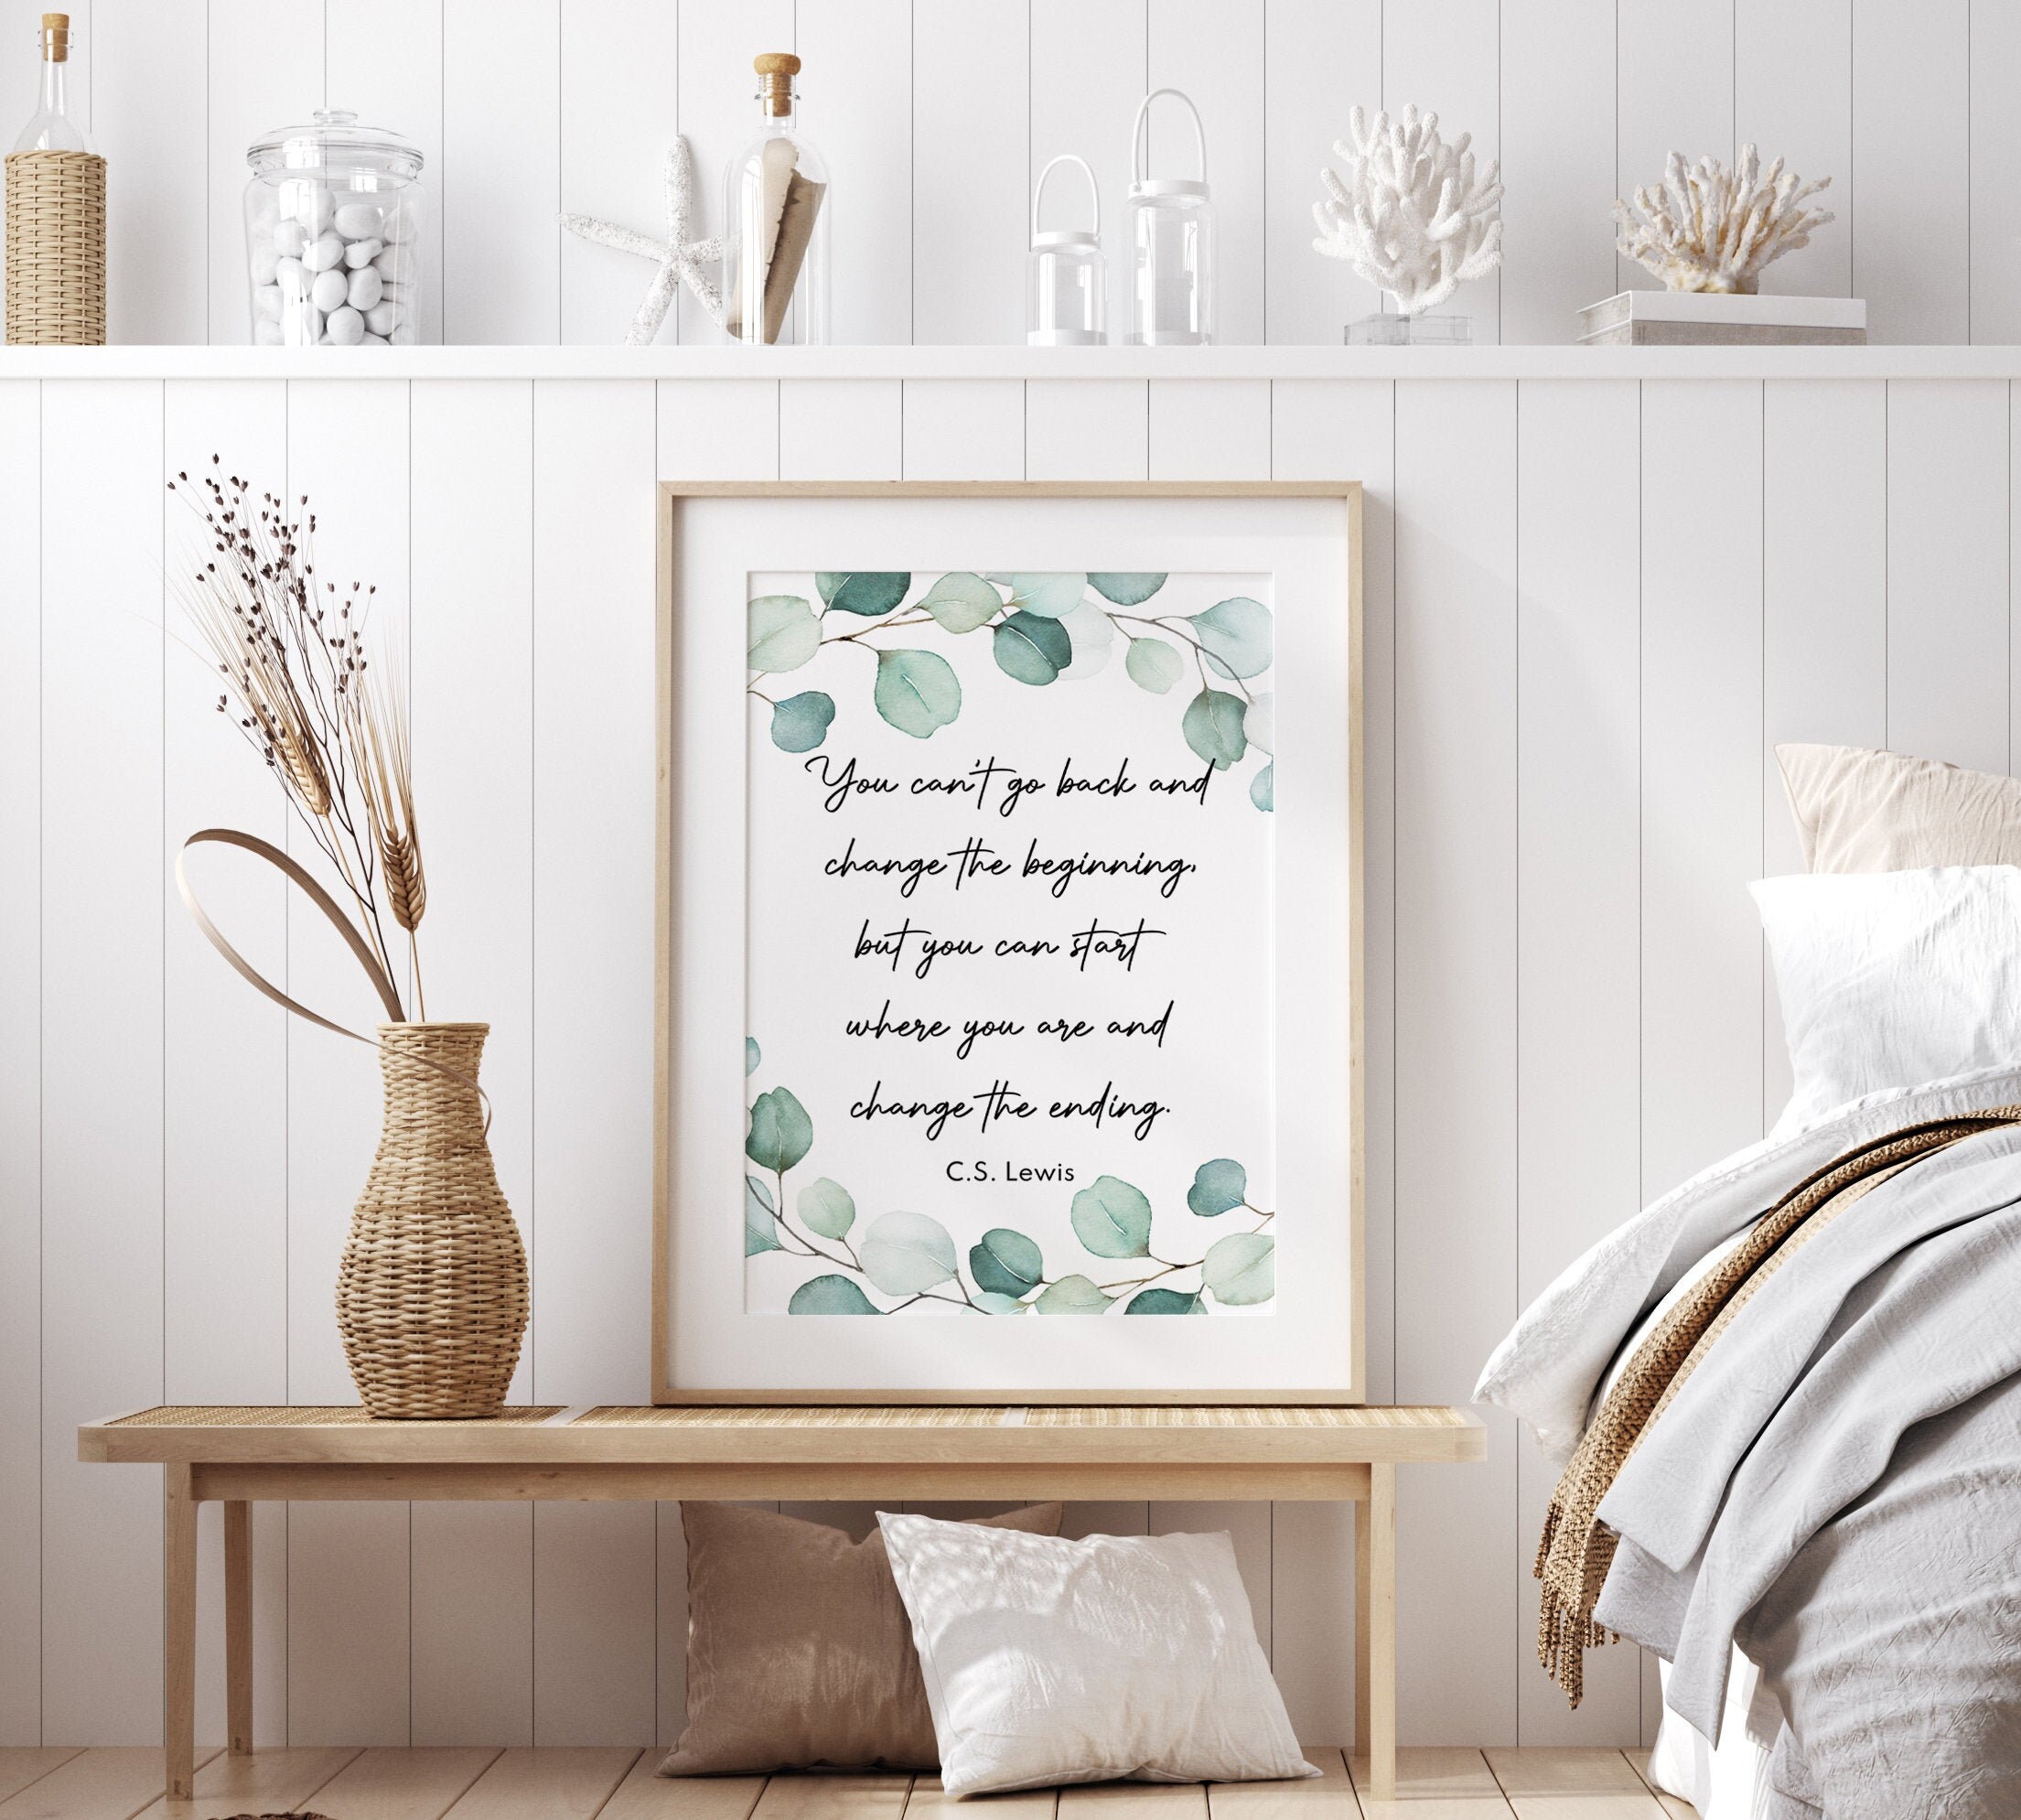 Inspiring MINDSET Quote Inspirational Printable Home Decor Self Love Aesthetic Digital Wall Art Motivational Quote